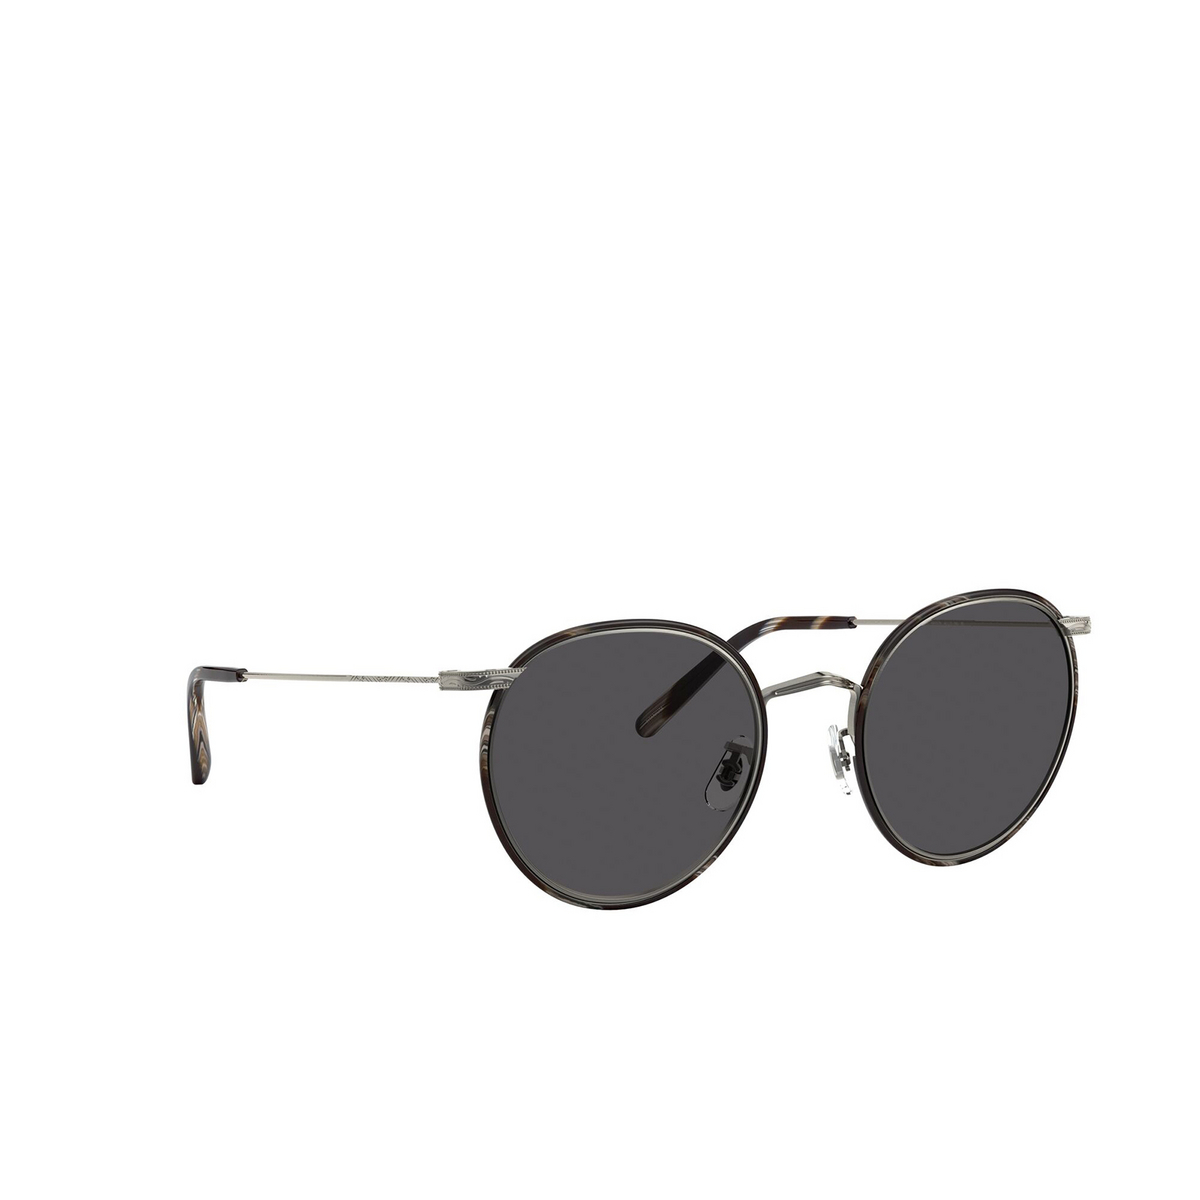 Oliver Peoples® Round Sunglasses: Casson OV1269ST color Pewter / Black Horn 5076R5 - three-quarters view.